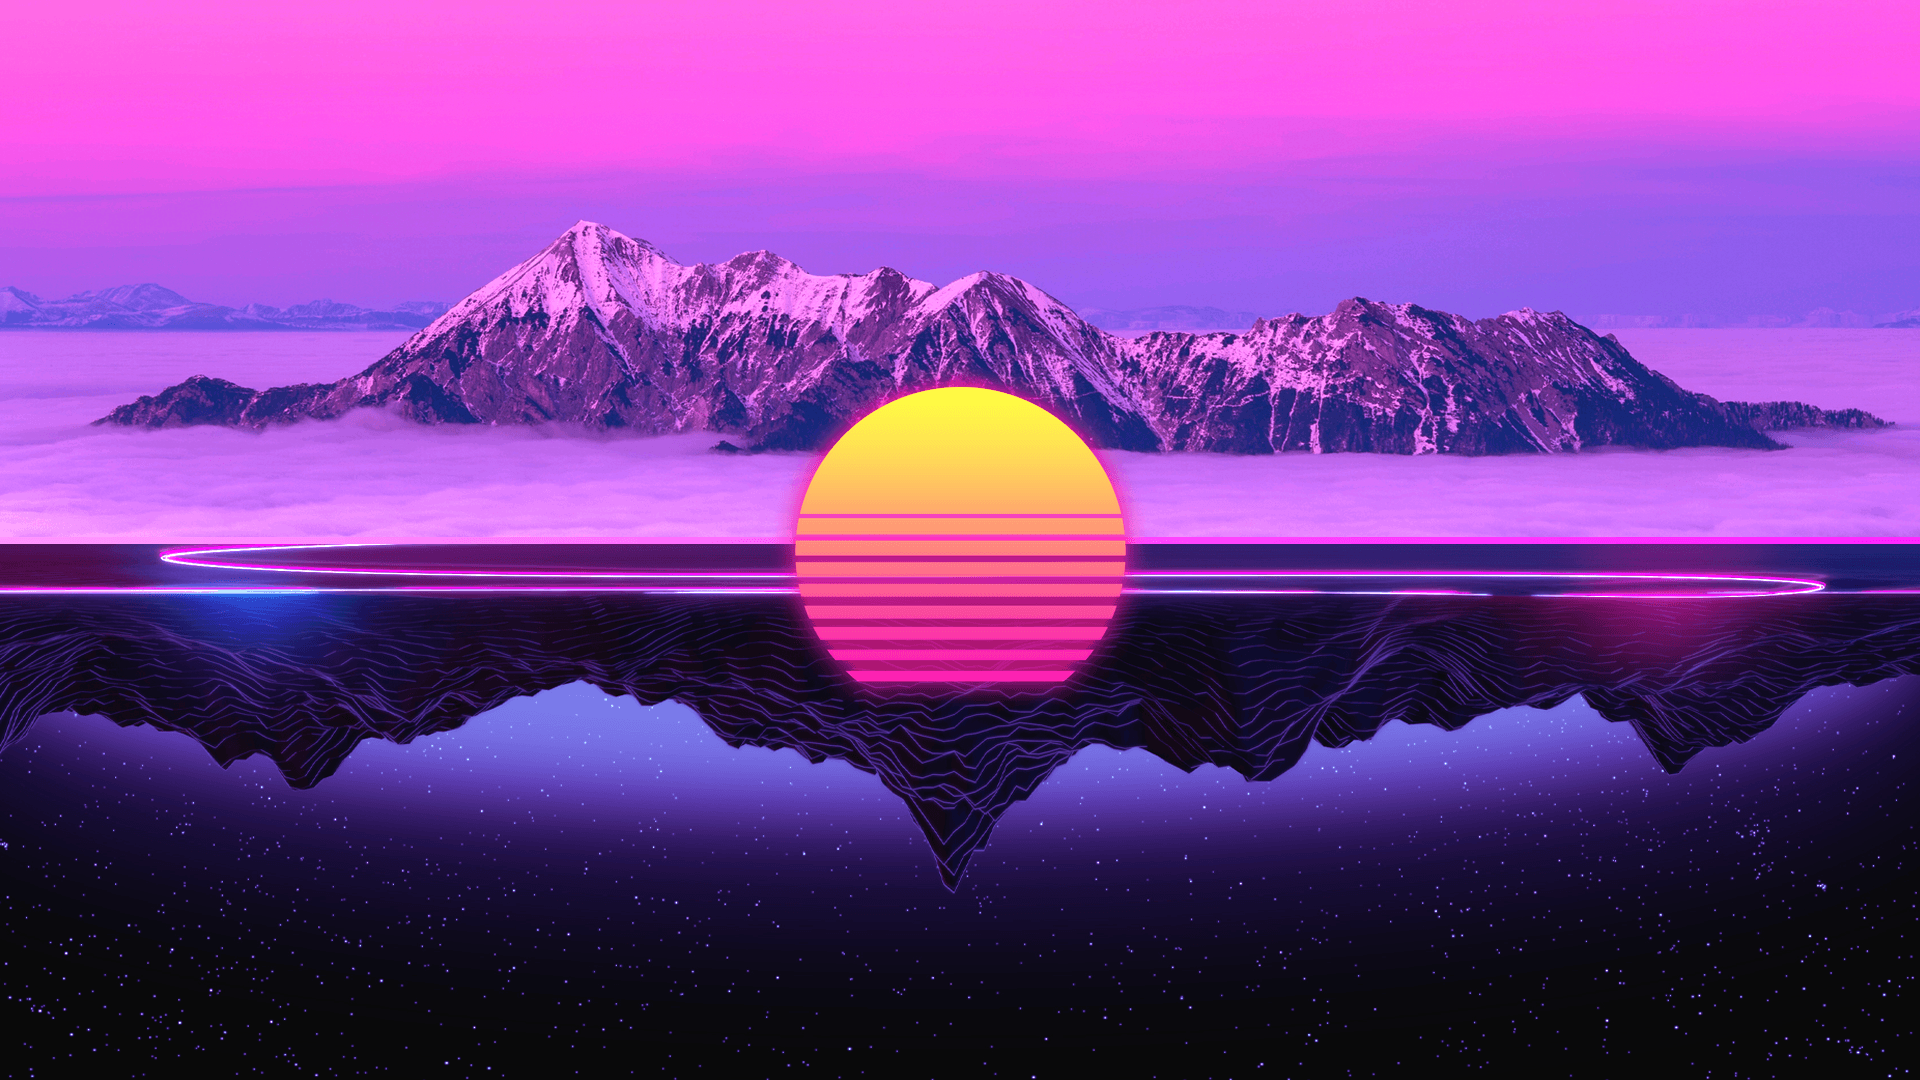 Retro Computer Aesthetic Hd Wallpapers